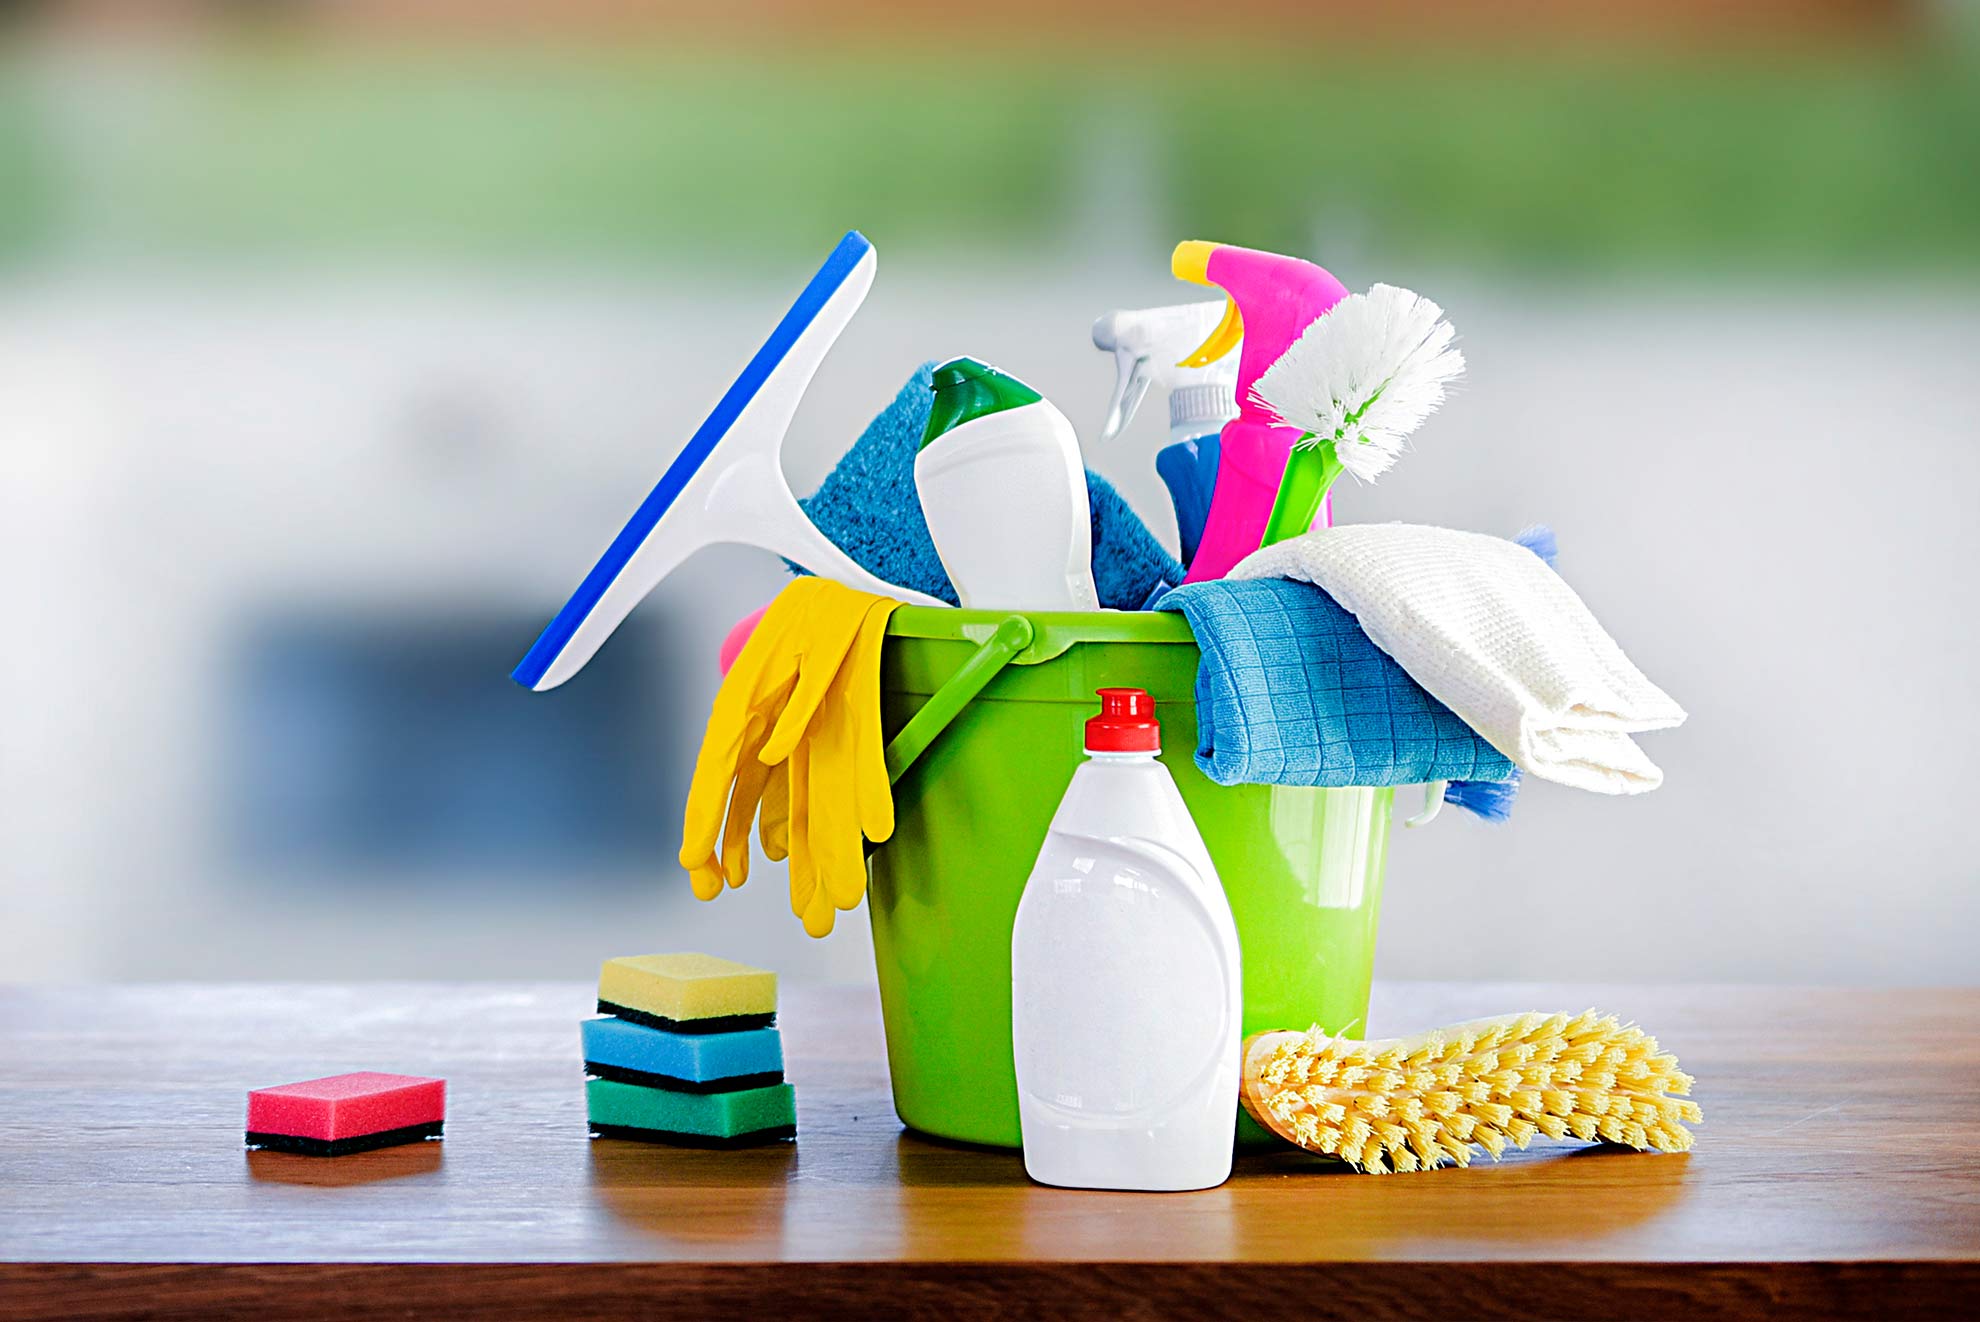 Top 5 Home Cleaning Services in Metro Manila - Carousell Philippines Blog